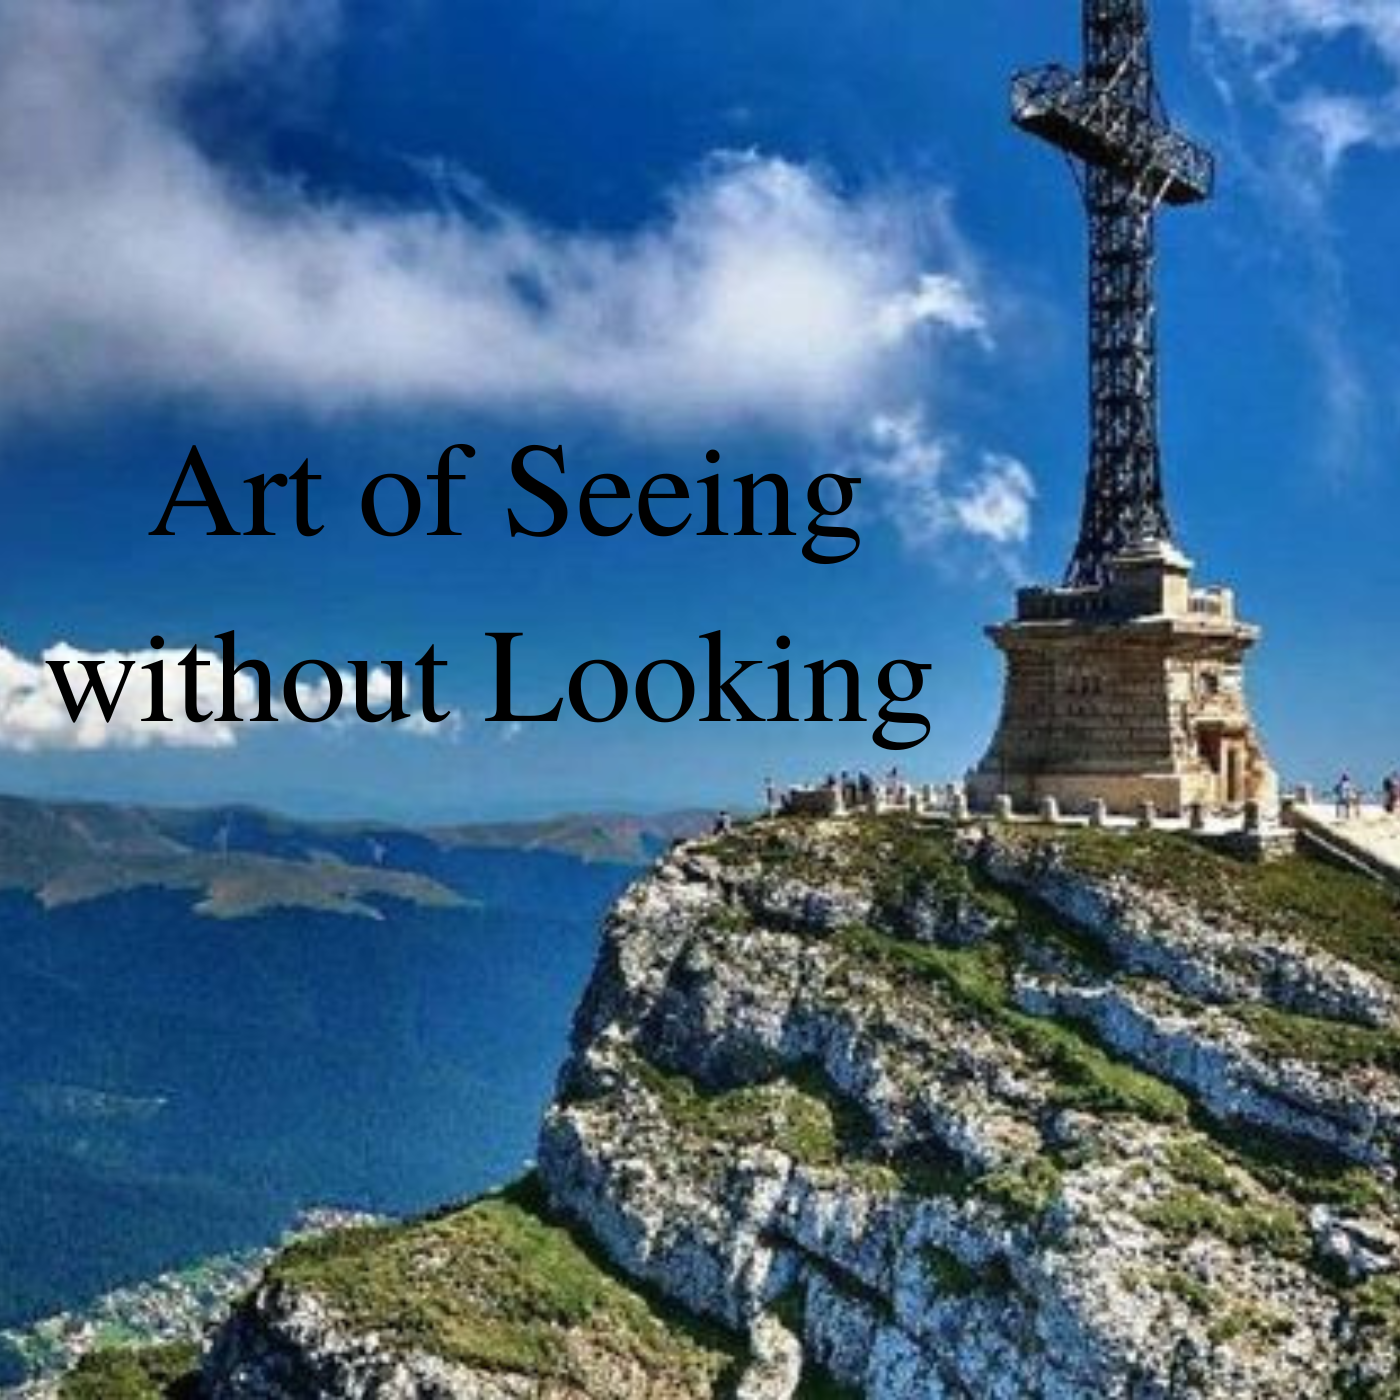 Art of Seeing without Looking